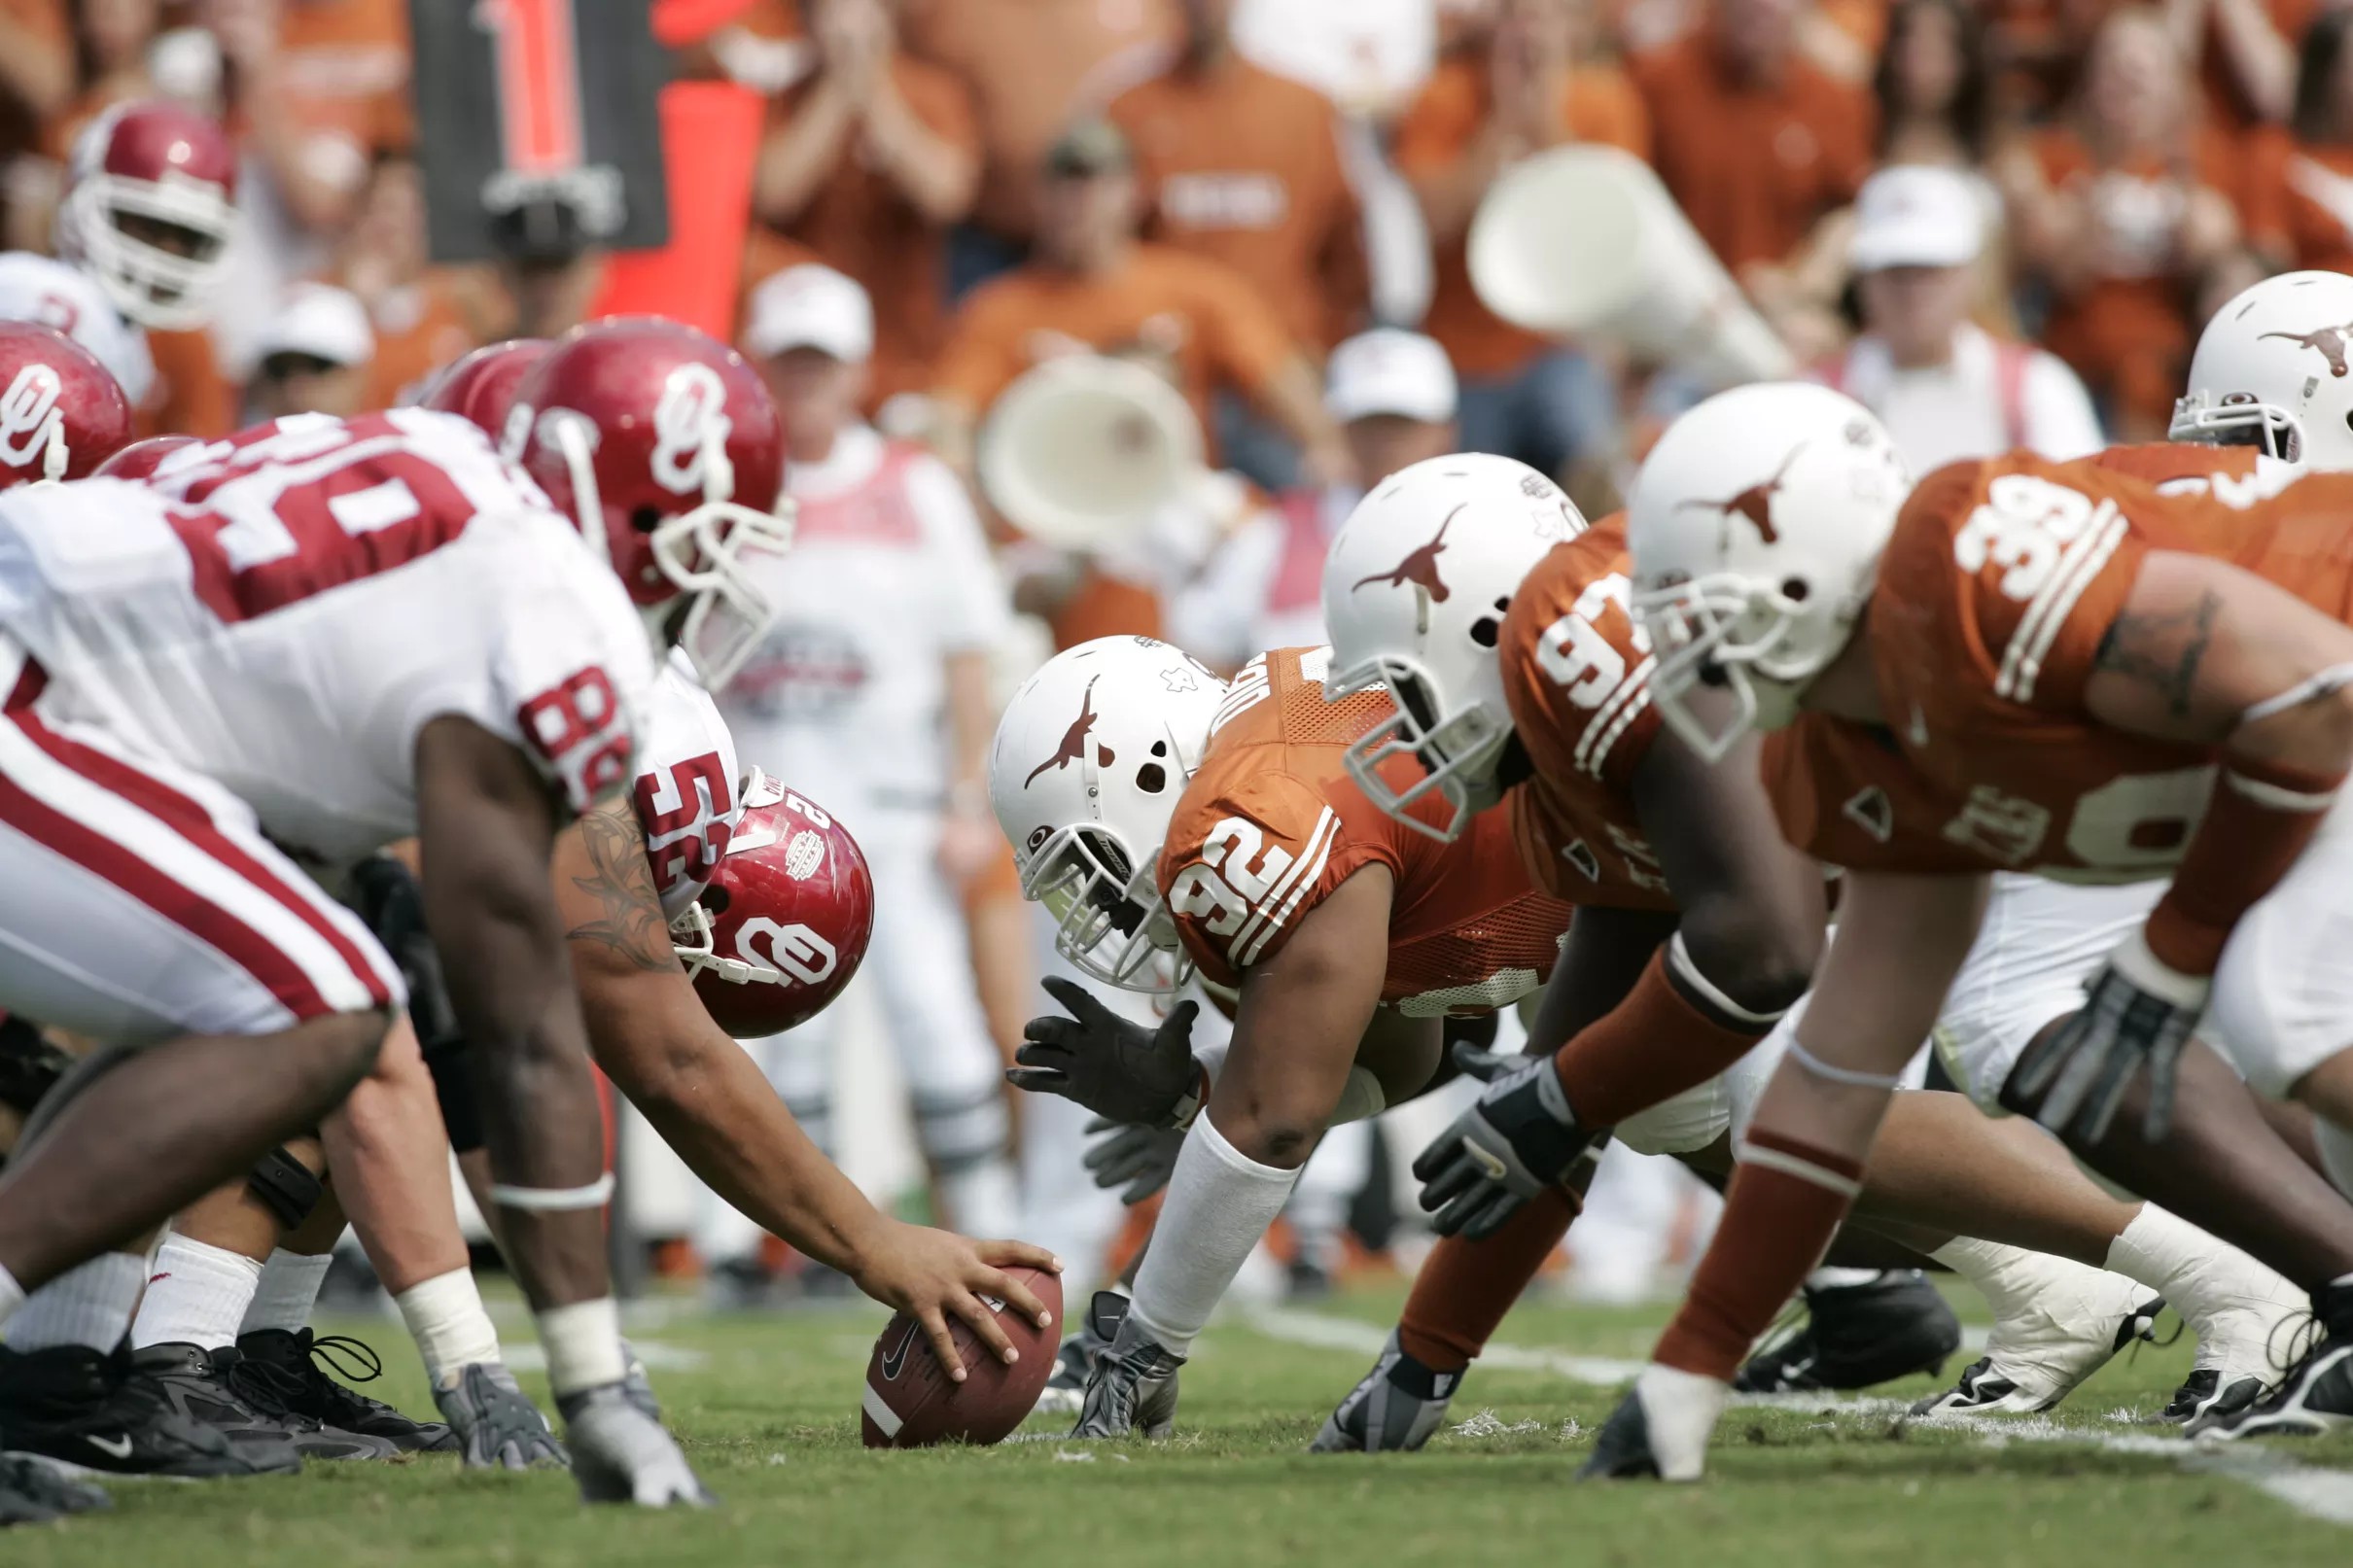 TexasOU THIS is What a Rivalry Looks Like